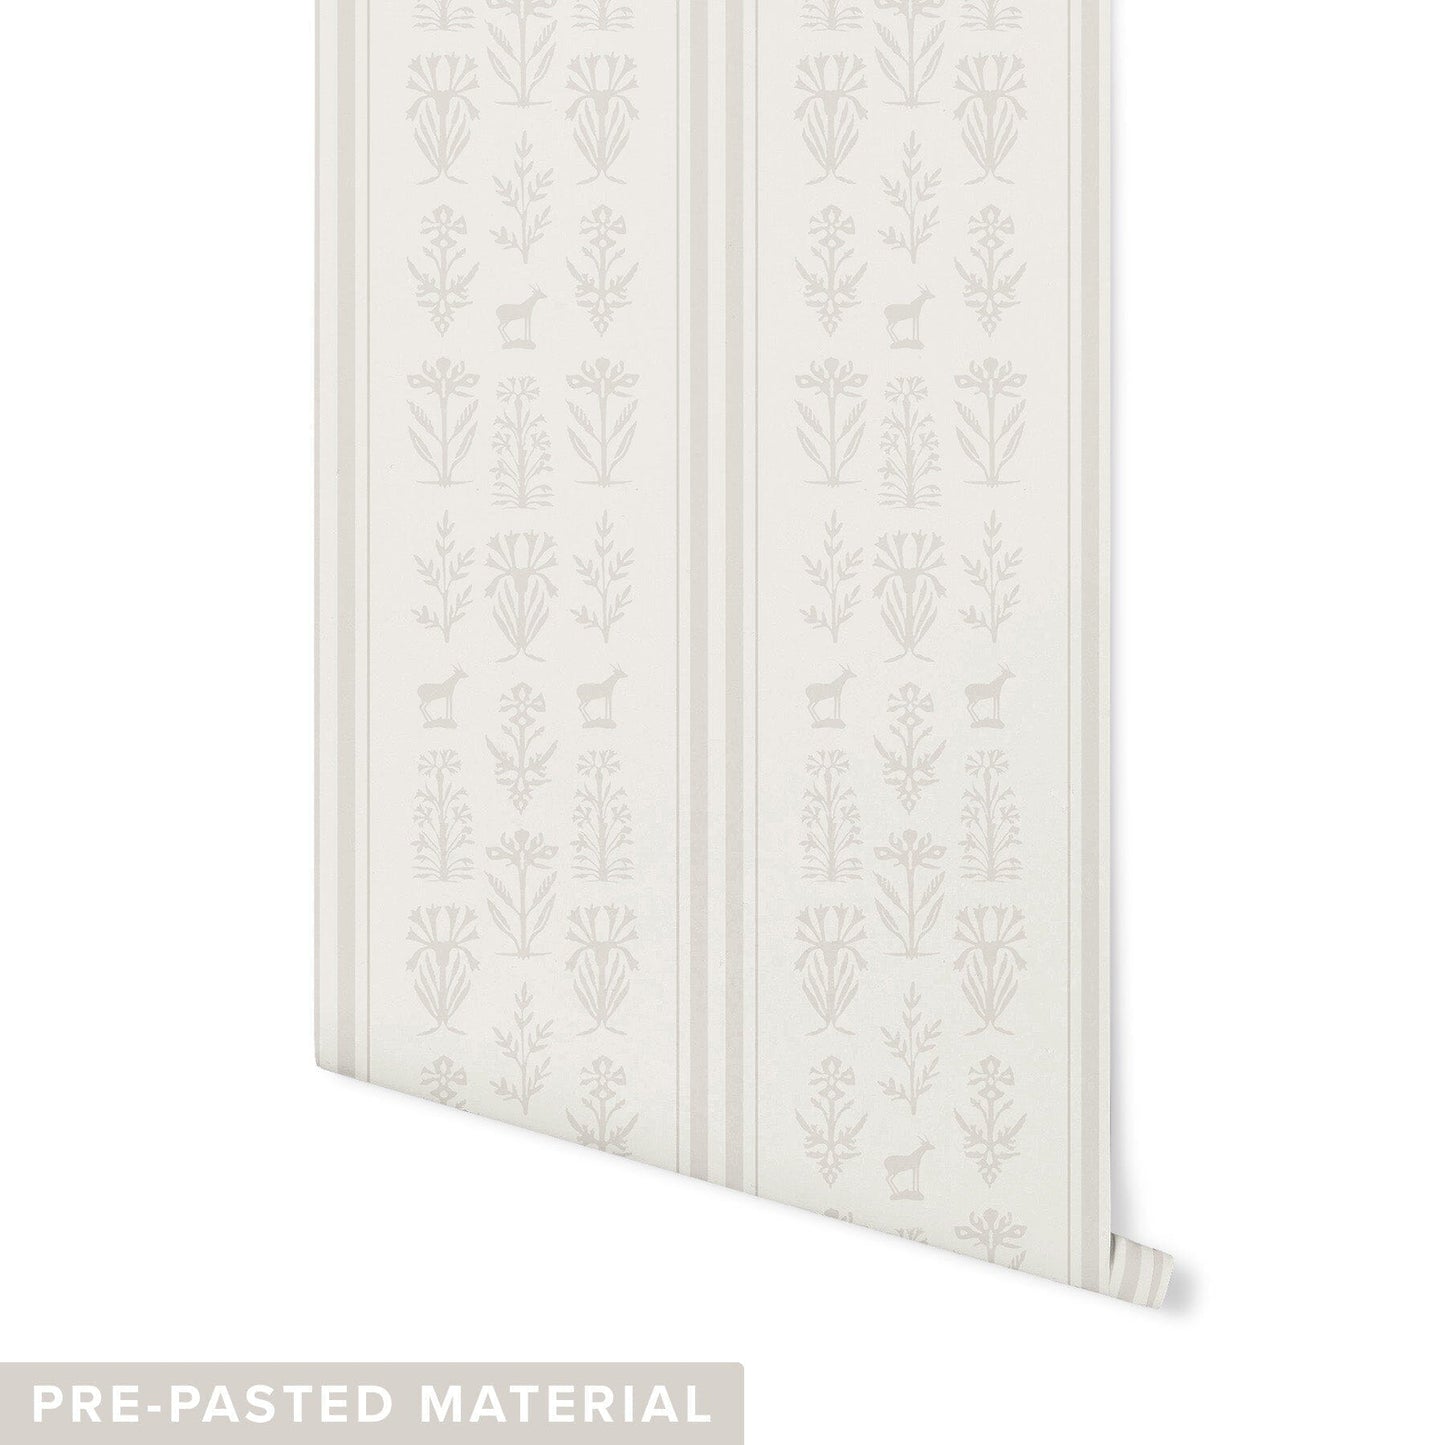 Seasonal Forage Wallpaper Wallpaper Mia Parres Pre-pasted Light Loon DOUBLE ROLL : 46" X 4 FEET